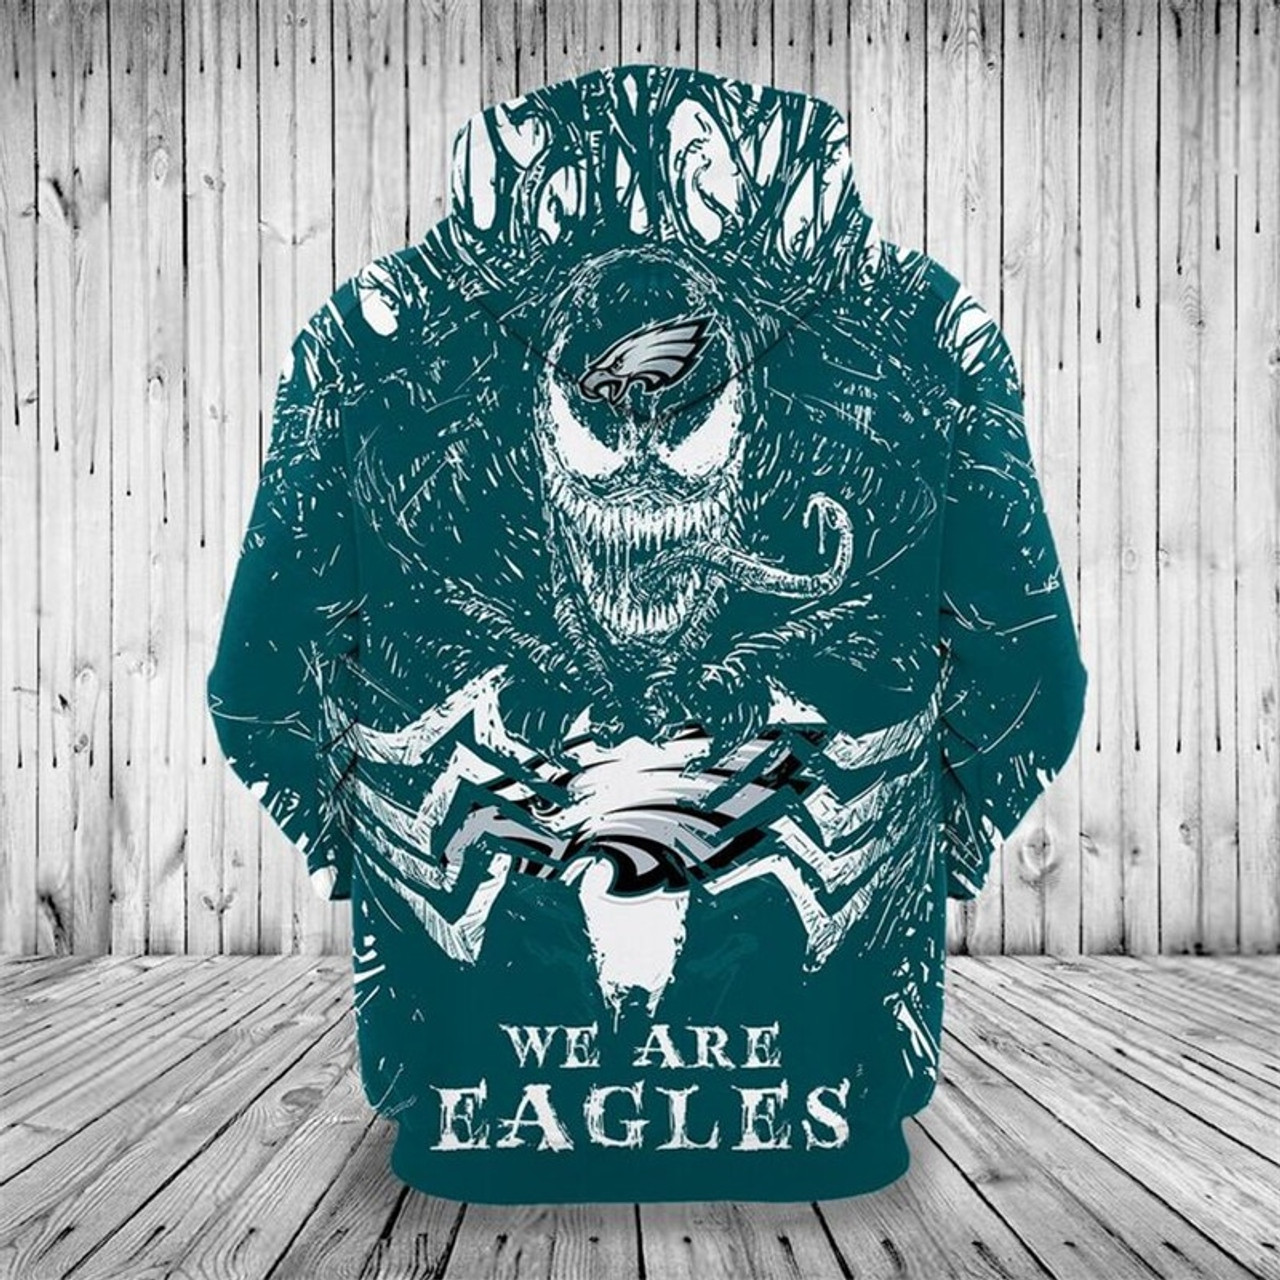 **(OFFICIALLY-LICENSED-N.F.L.PHILADELPHIA-EAGLES/CLASSIC-VENOM-HORROR-MOVIE-CHARACTER-PULLOVER-HOODIES/NICE-DETAILED-PREMIUM-CUSTOM-3D-GRAPHIC-PRINTED/ALL-OVER-PRINTED-DESIGN,PREMIUM-WARM-N.F.L.PHILADELPHIA-EAGLES-LOGO-PULLOVER-HOODIES)**